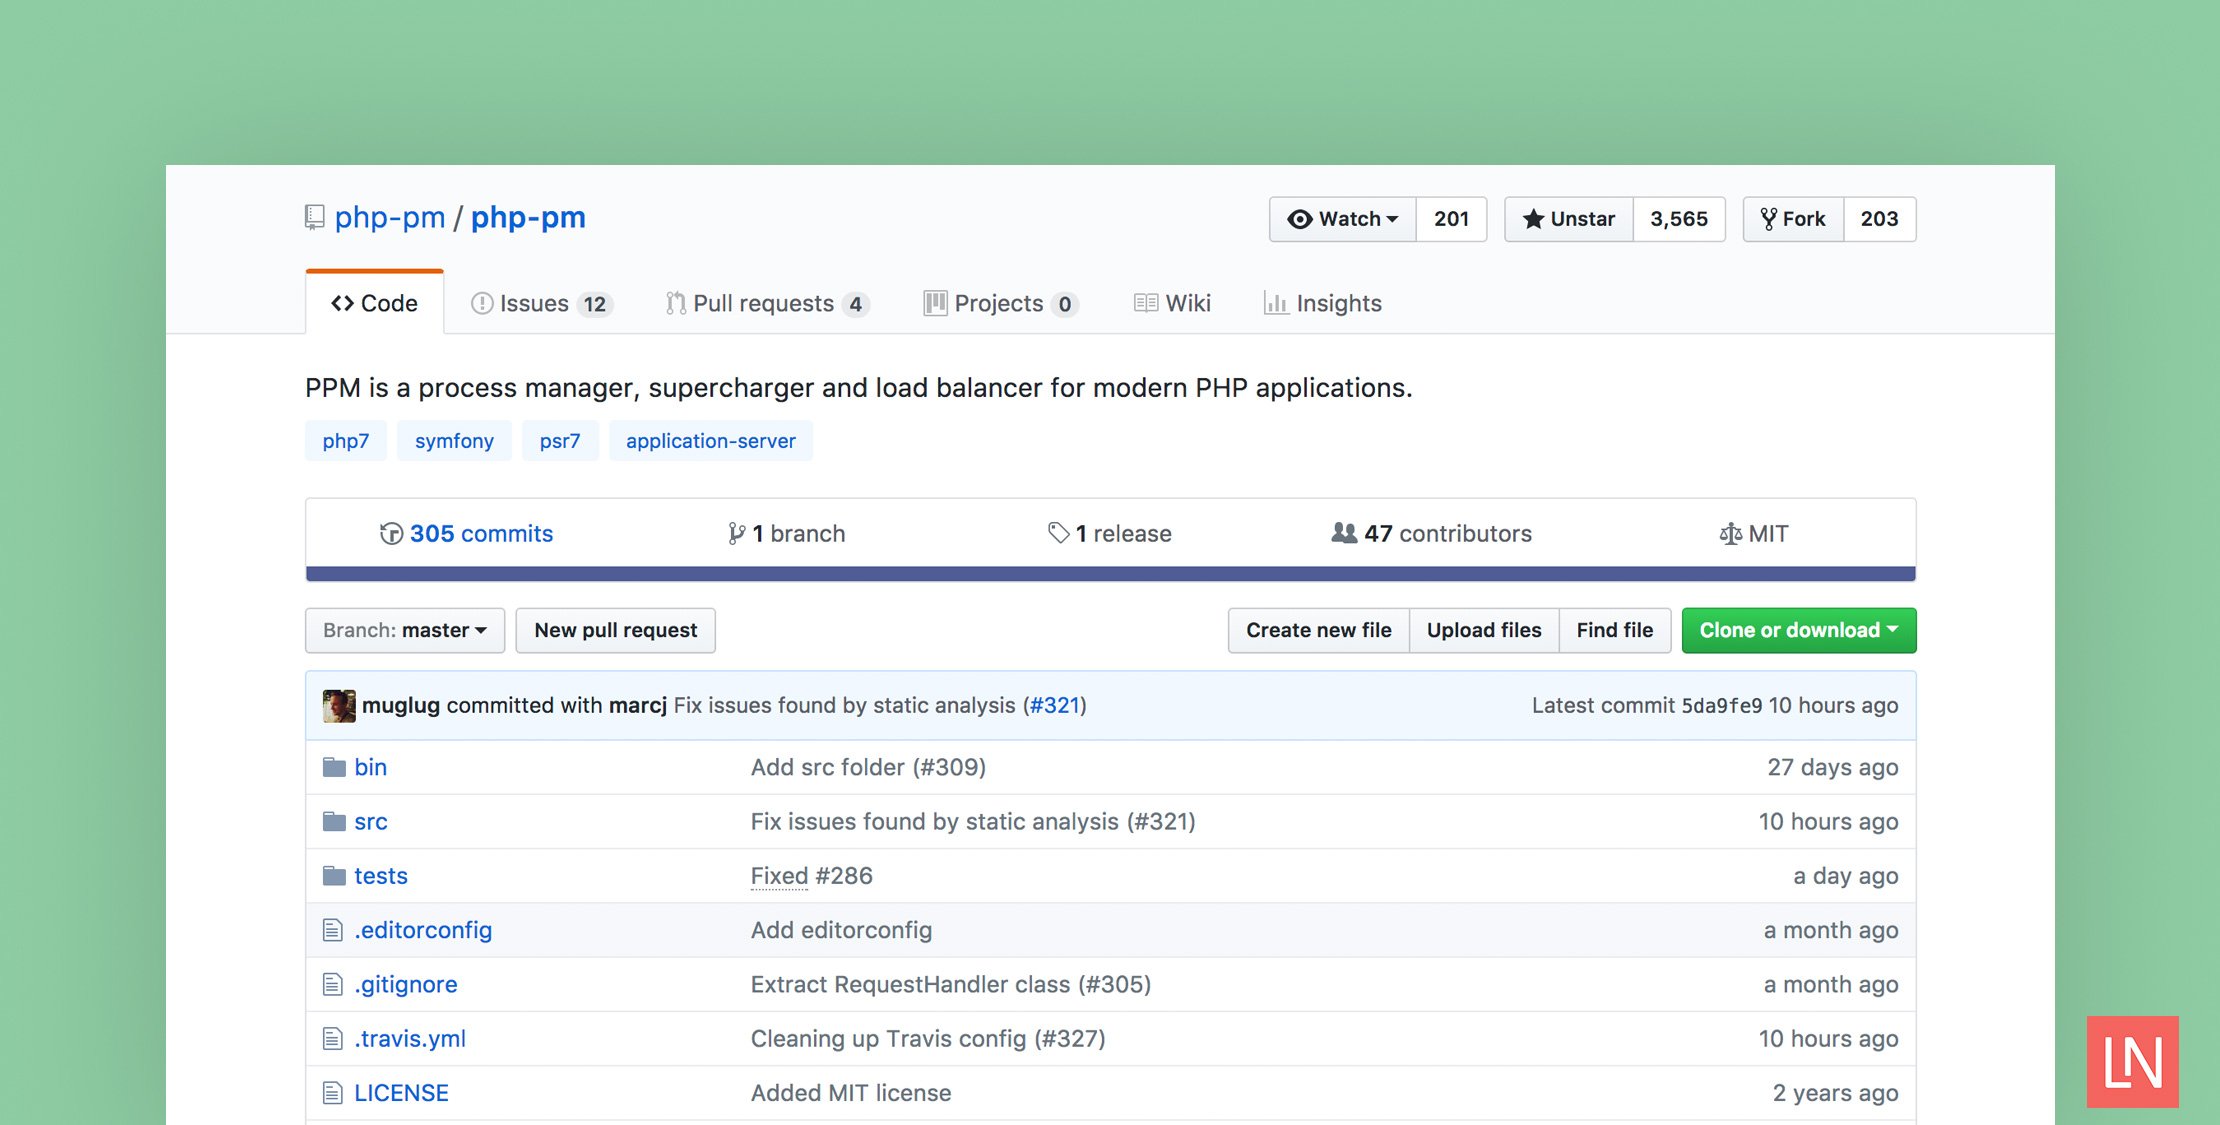 PHP-PM Is a Process Manager, Supercharger, and Load Balancer for PHP Applications image